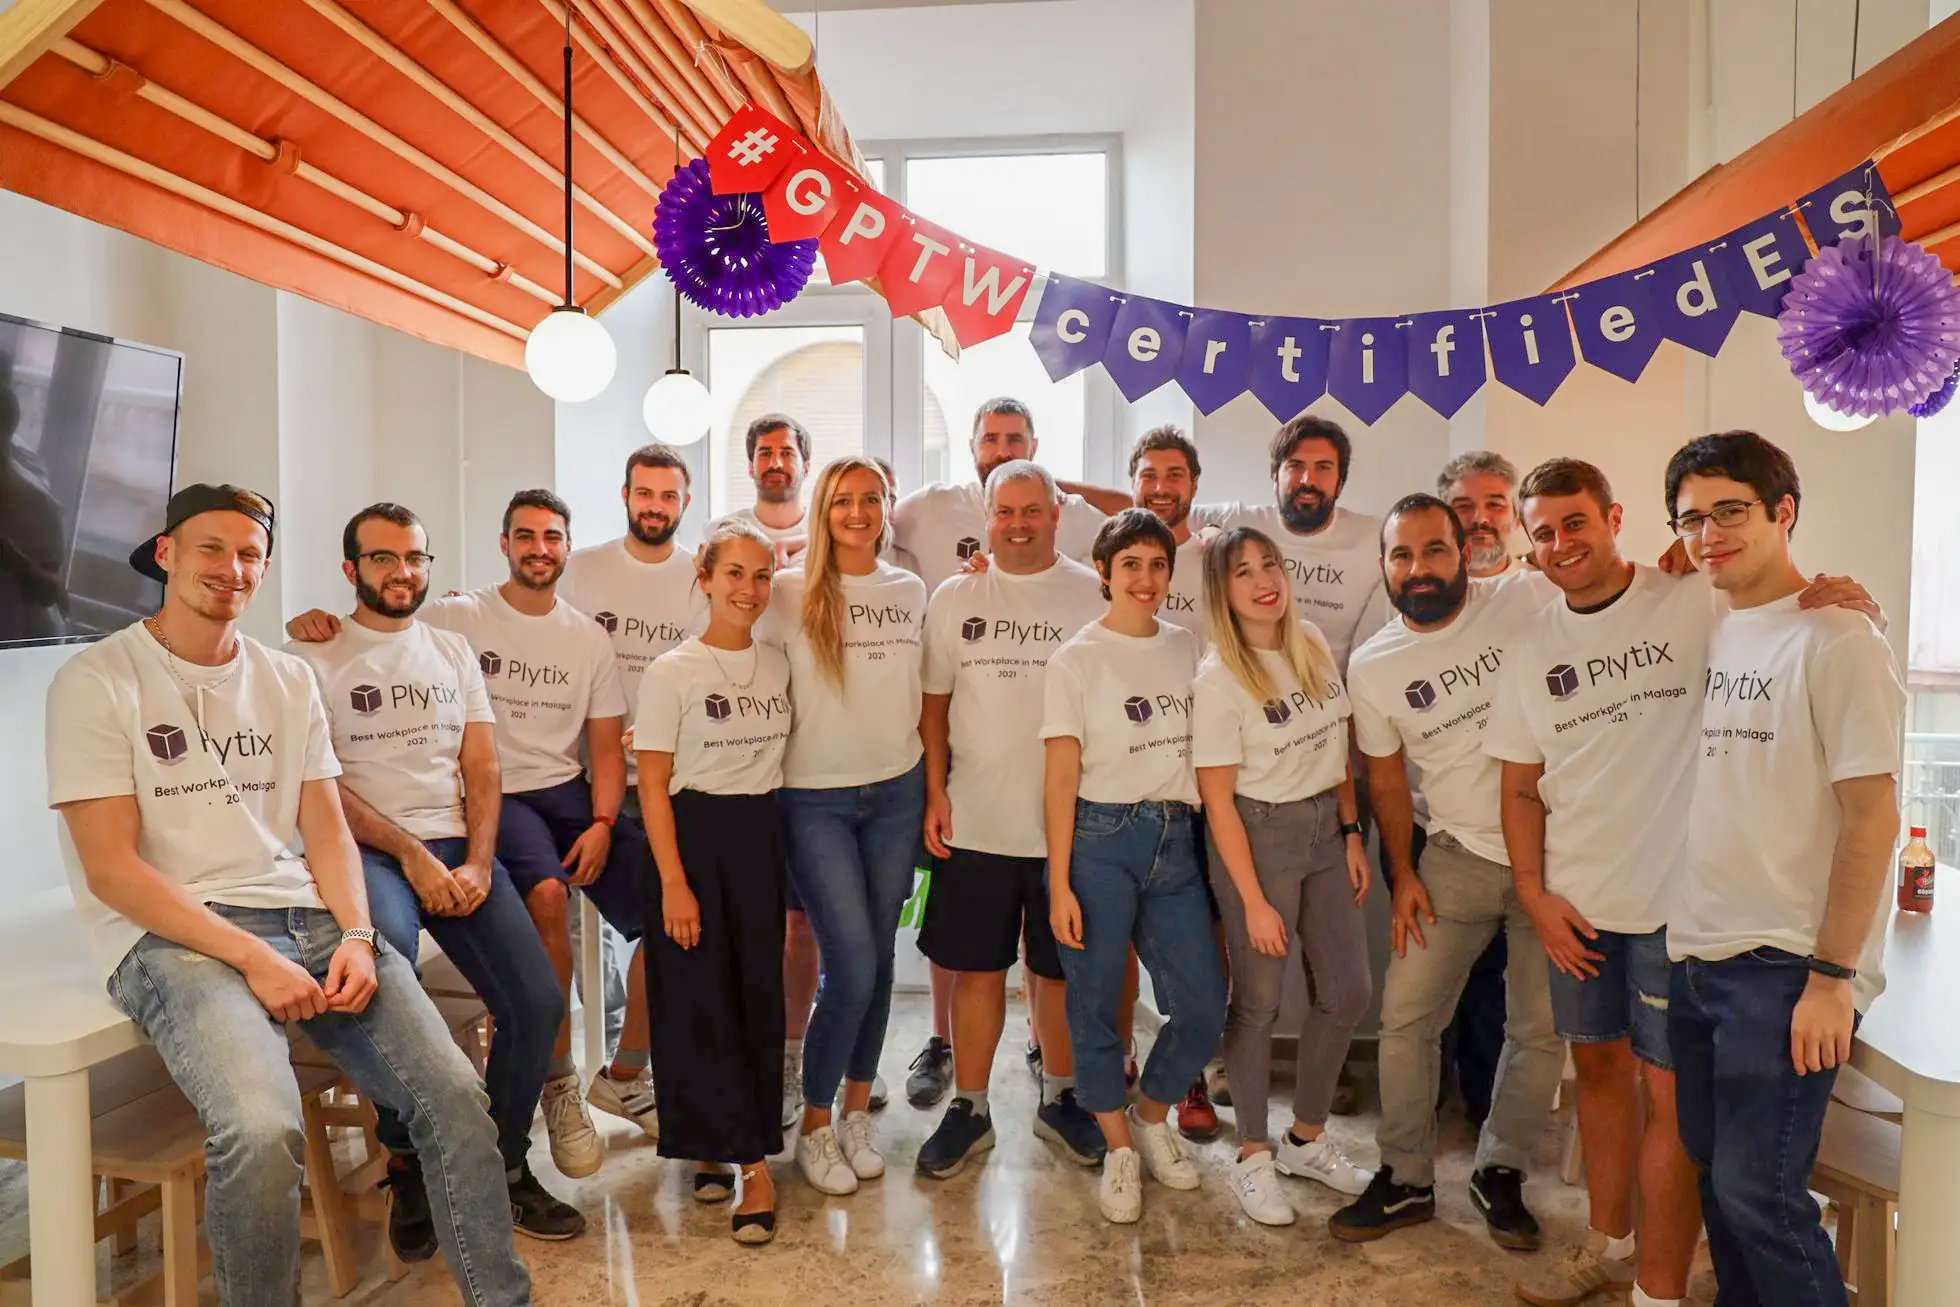 Plytix team in a photo after being recognized as the #1 Best Workplace in Málaga, Spain